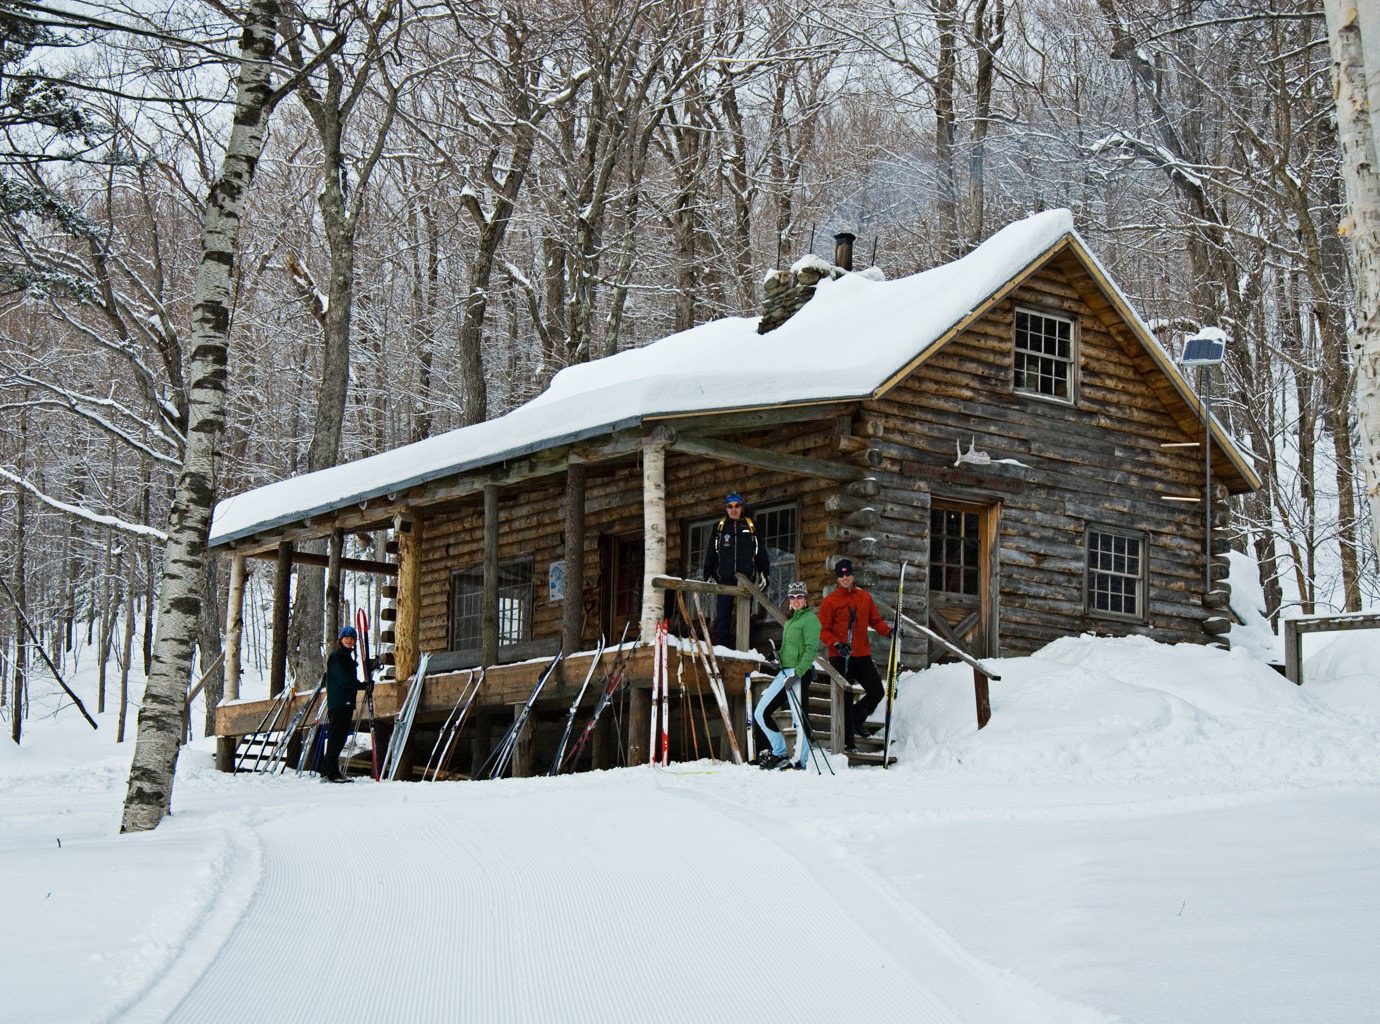 Country Family Lodge Mountains Outdoor Activities Outdoors Ski Trip Ideas Weekend Getaways snow tree outdoor Winter skiing weather house Nature season sugar house log cabin blizzard nordic skiing